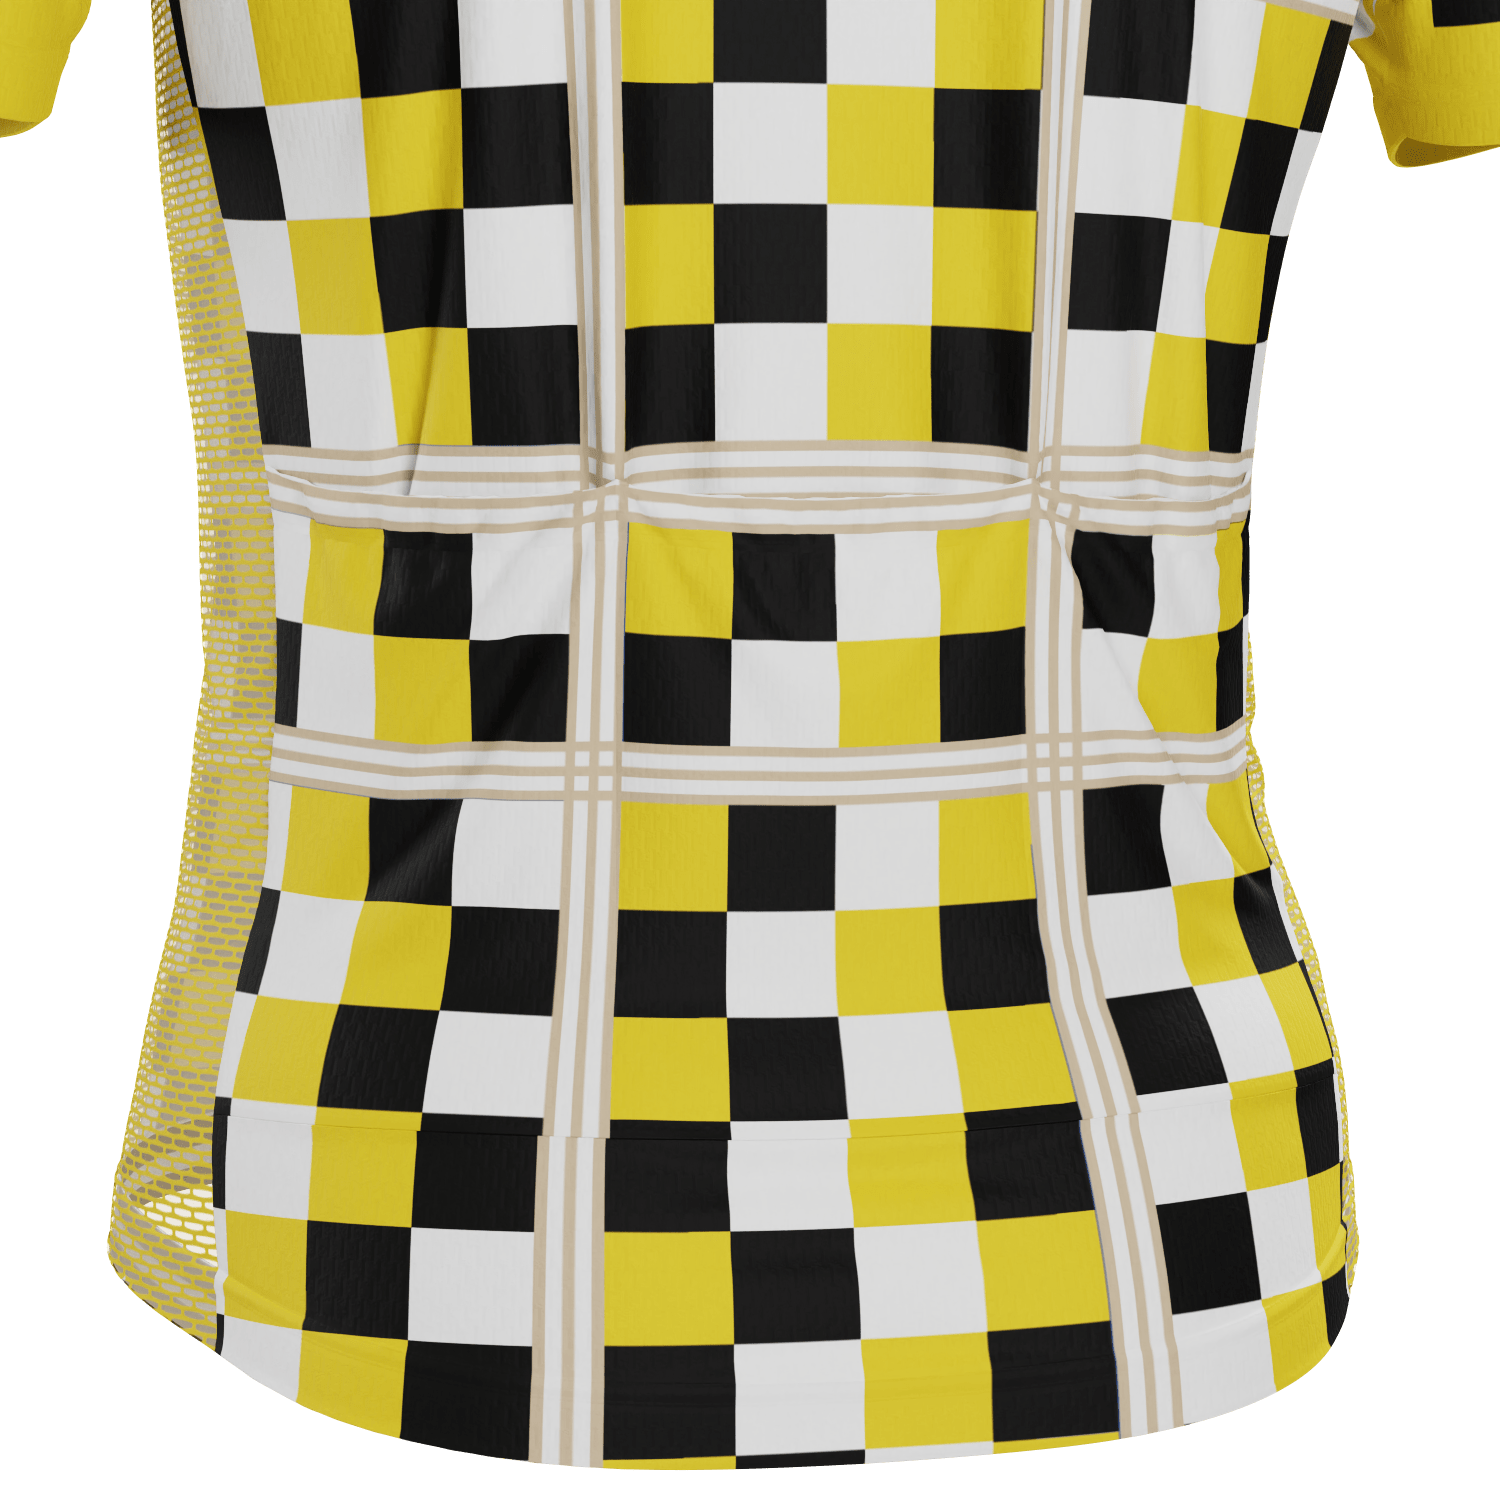 Men's Checkered Plaid Short Sleeve Cycling Jersey